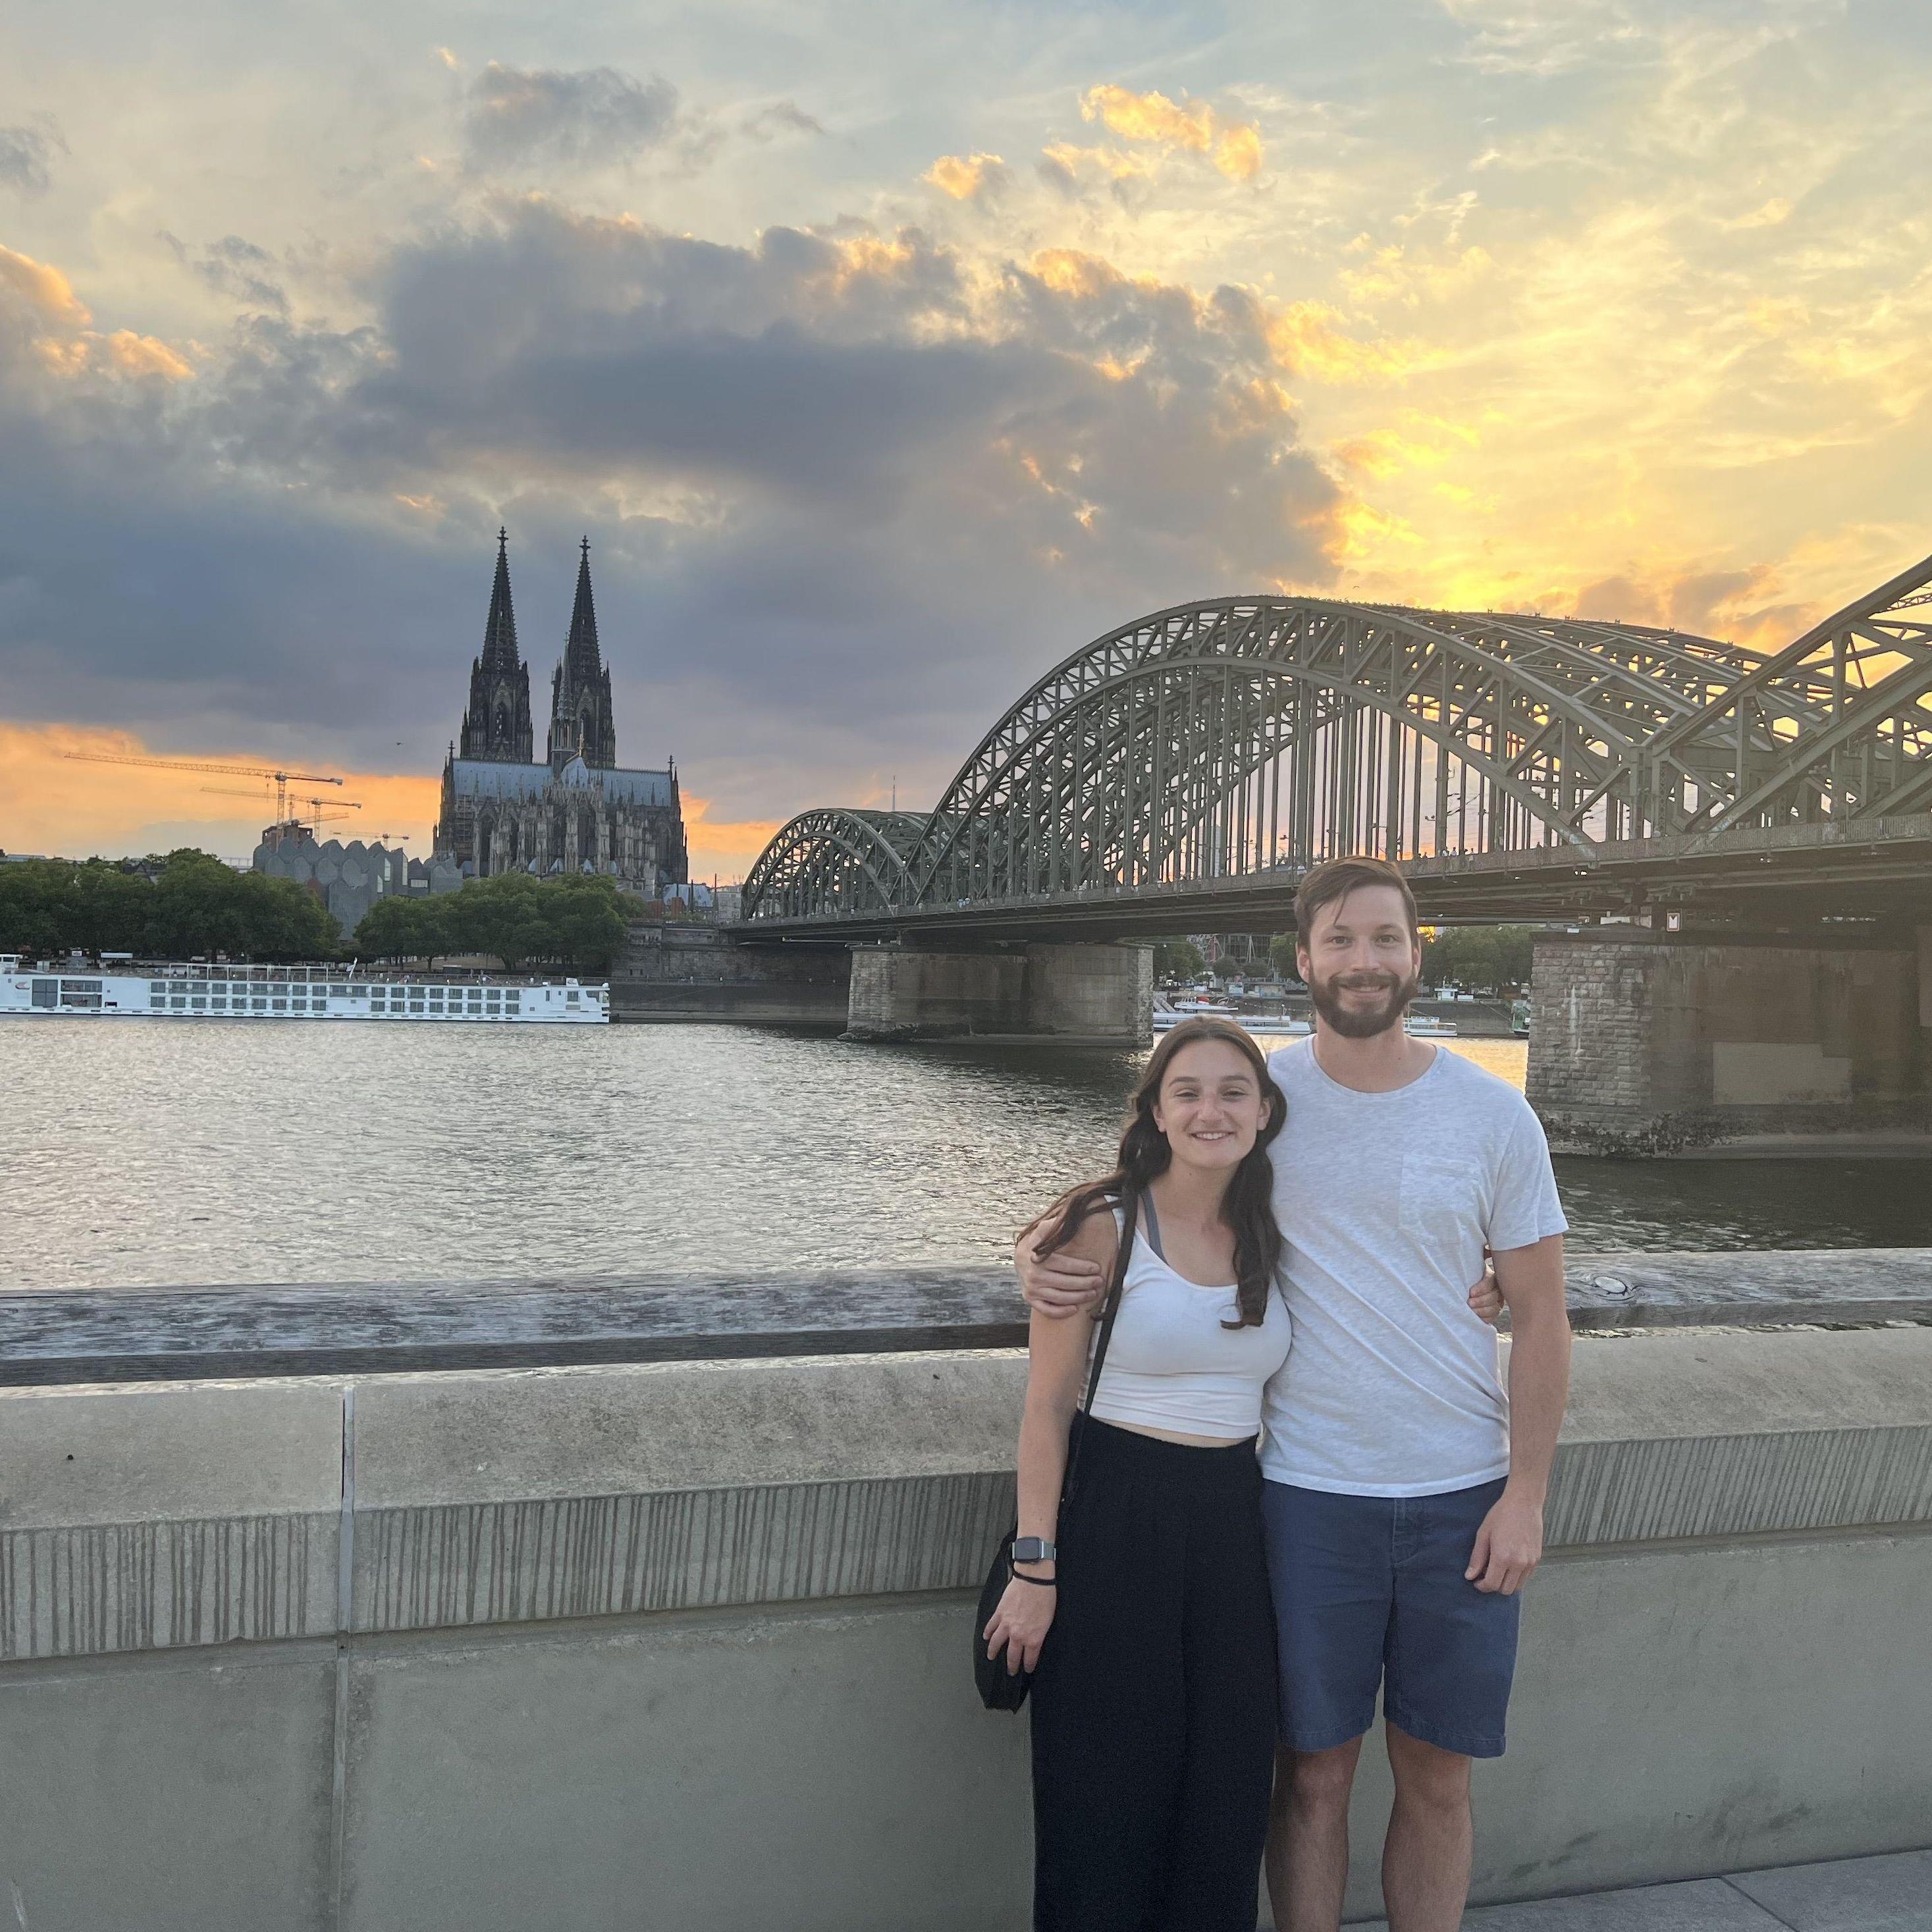 July 2022 - Sunset in Cologne, Germany